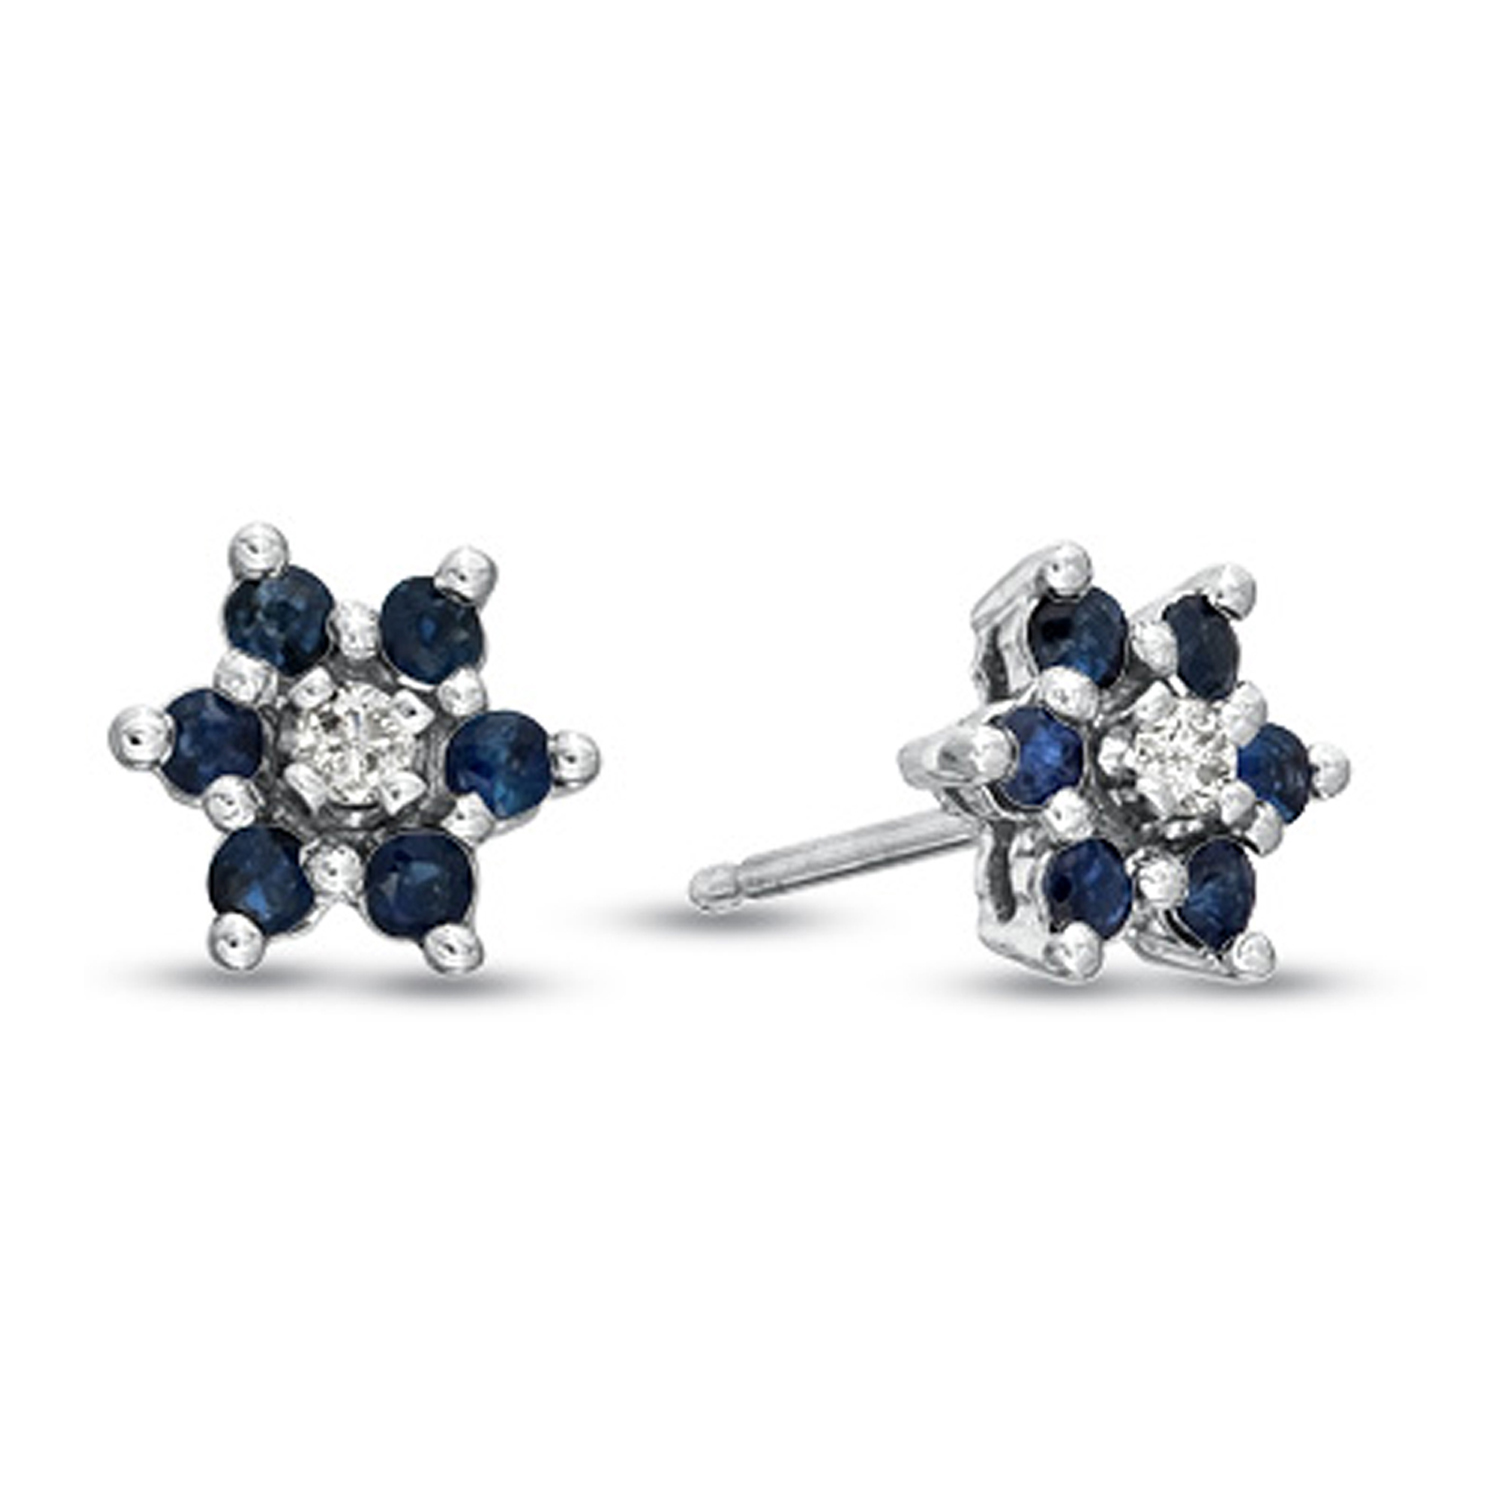 View 0.48cttw Sapphire and Diamond Flower Cluster Earrings set in 14k Gold